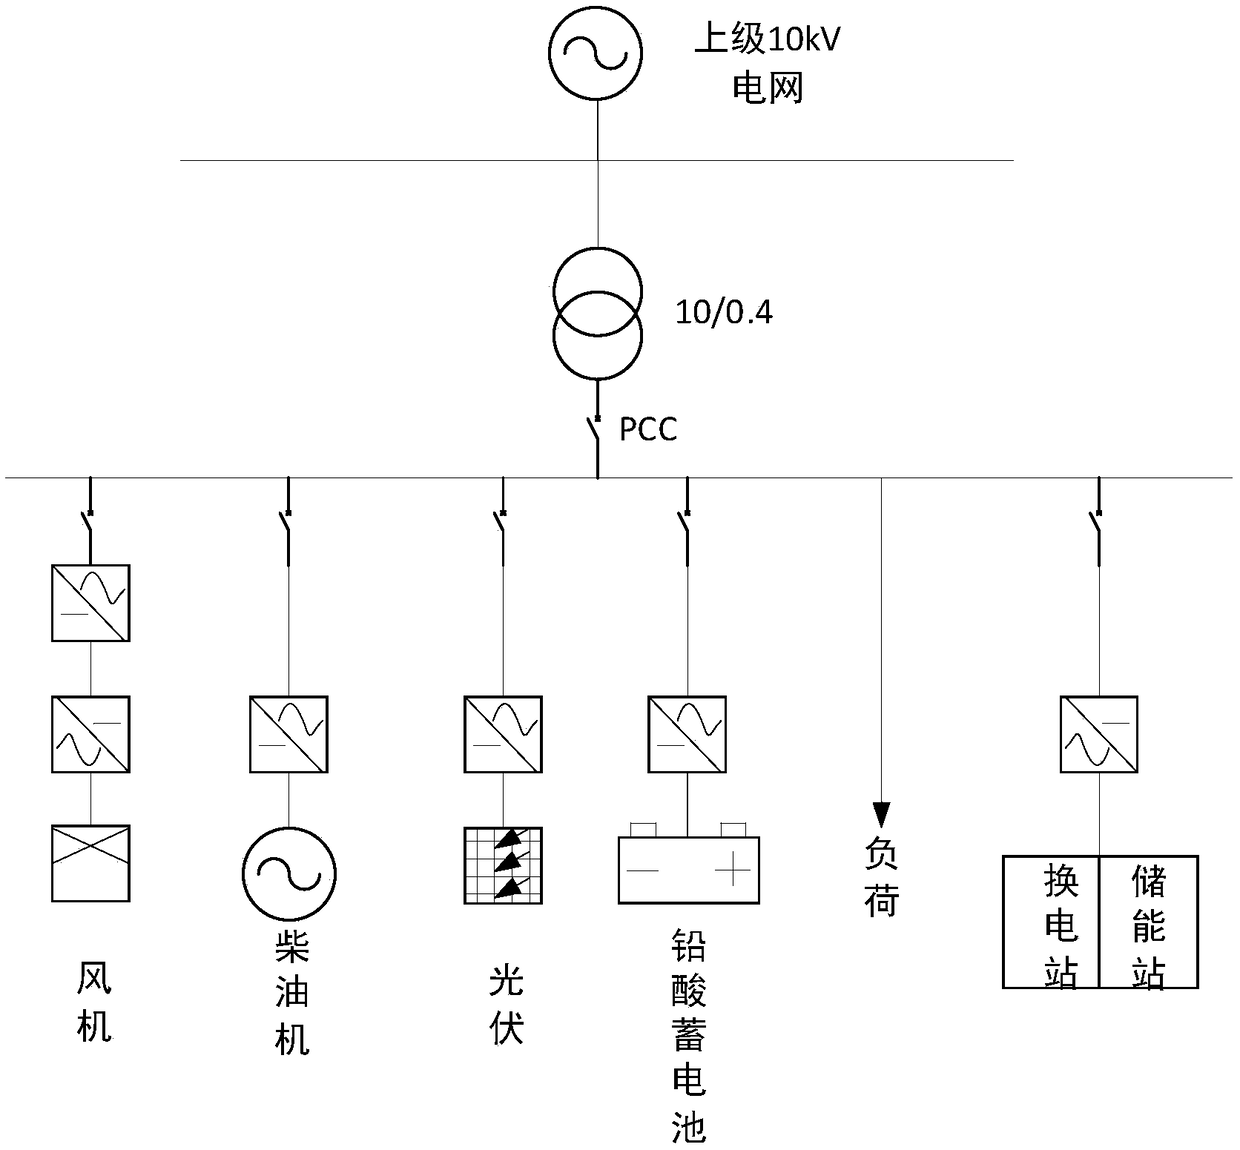 A charging, swap and storage integrated power station microgrid optimization scheduling method based on a non-cooperative game